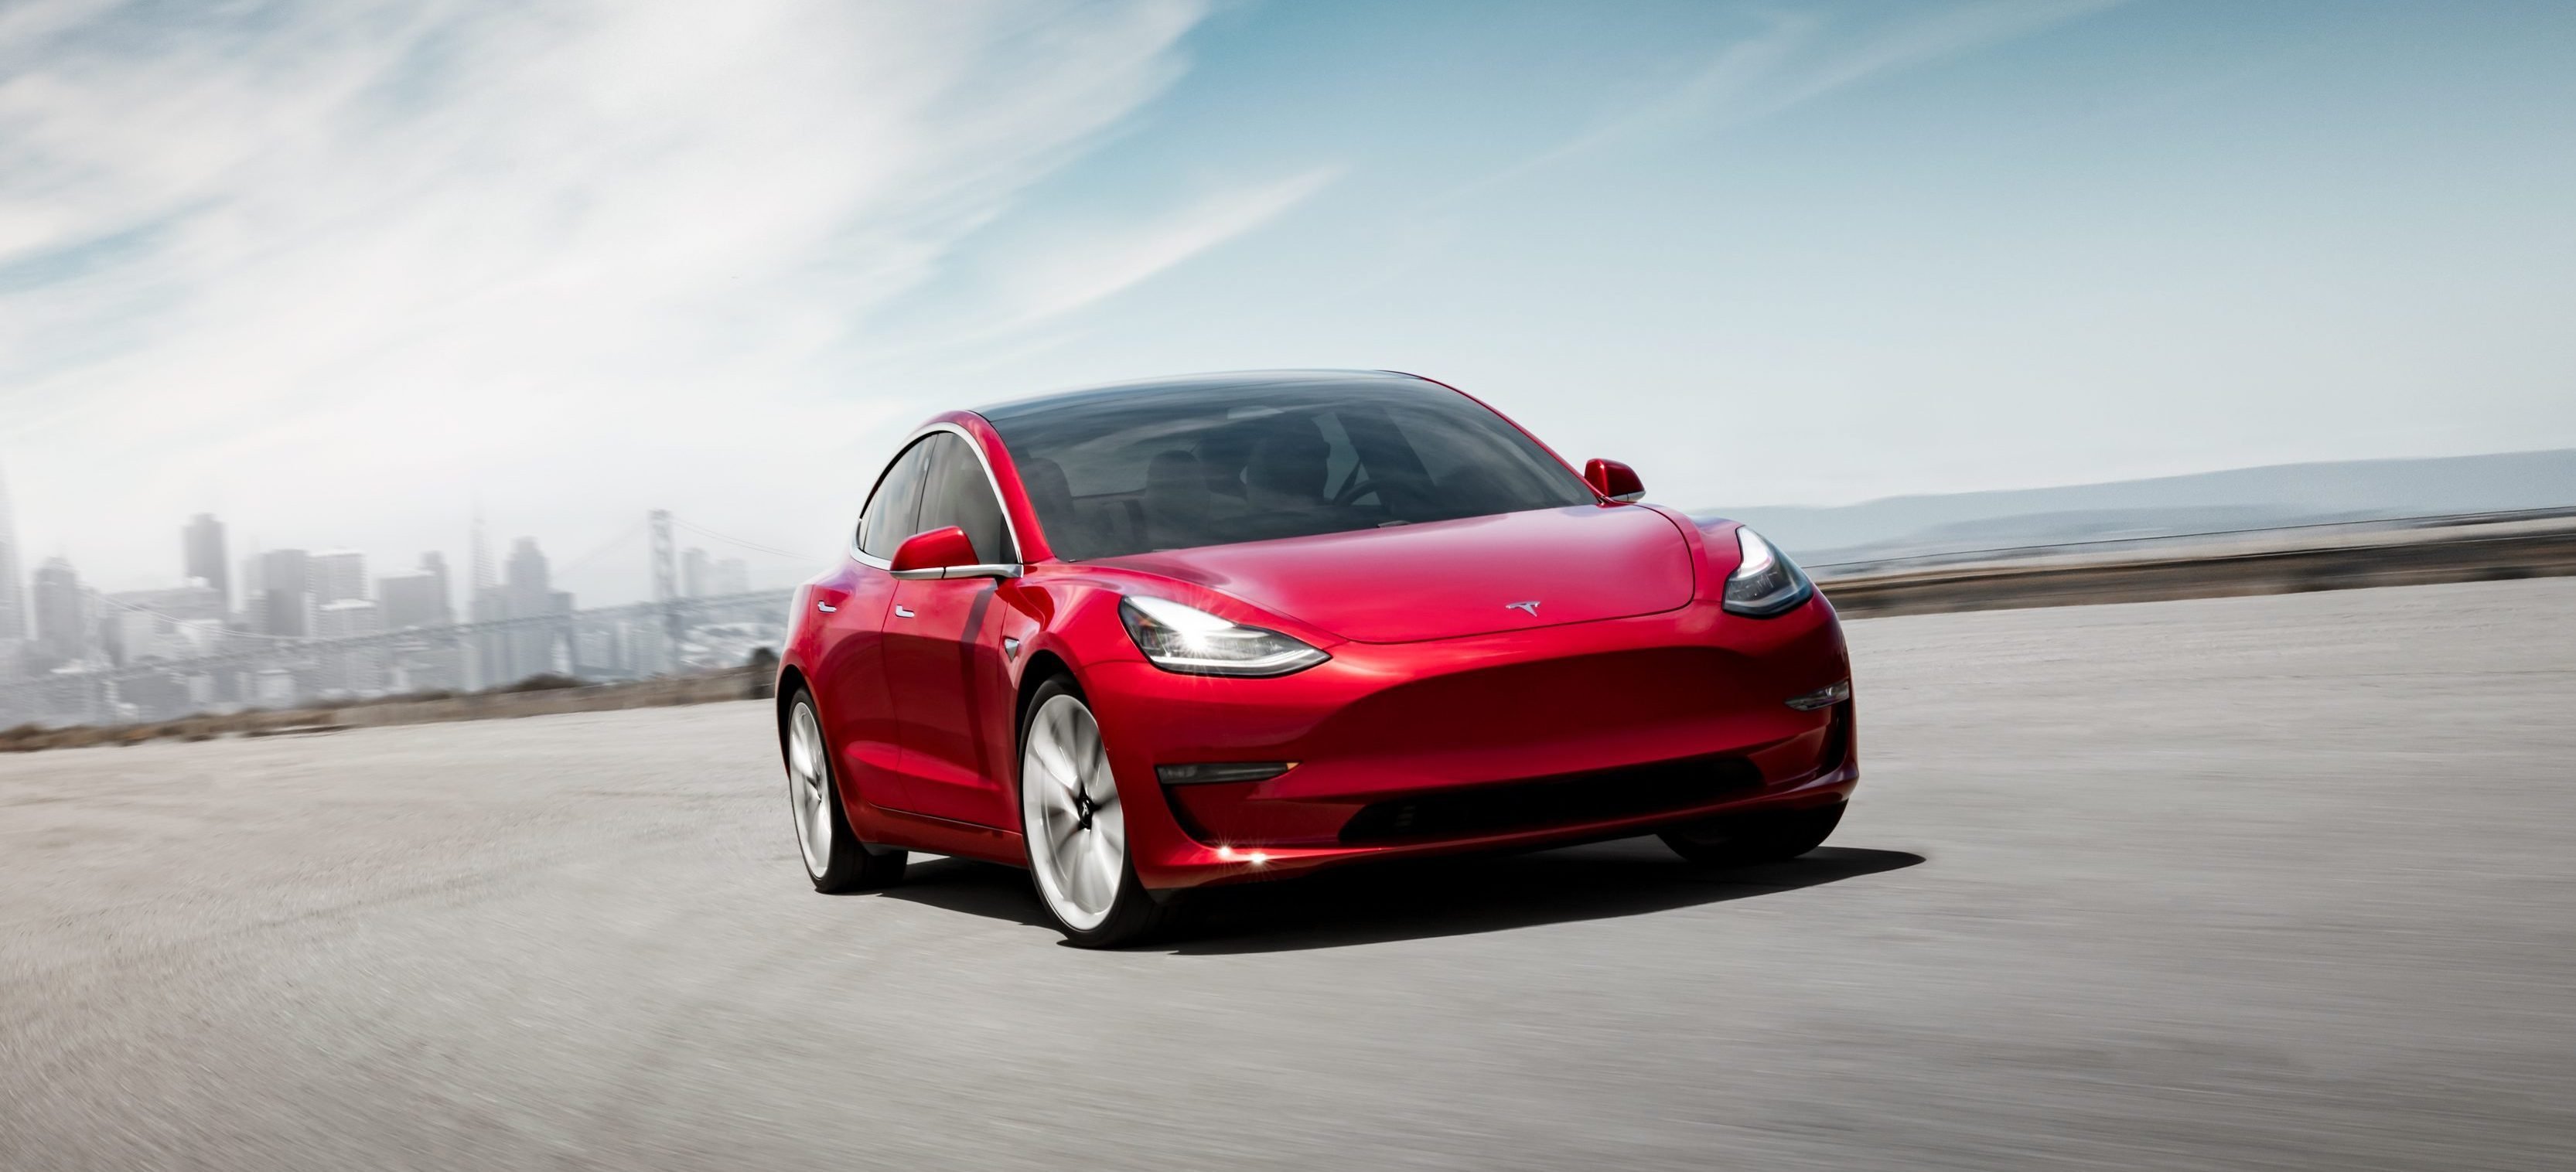 The price of Model 3 are even closer to the promised $ 35,000